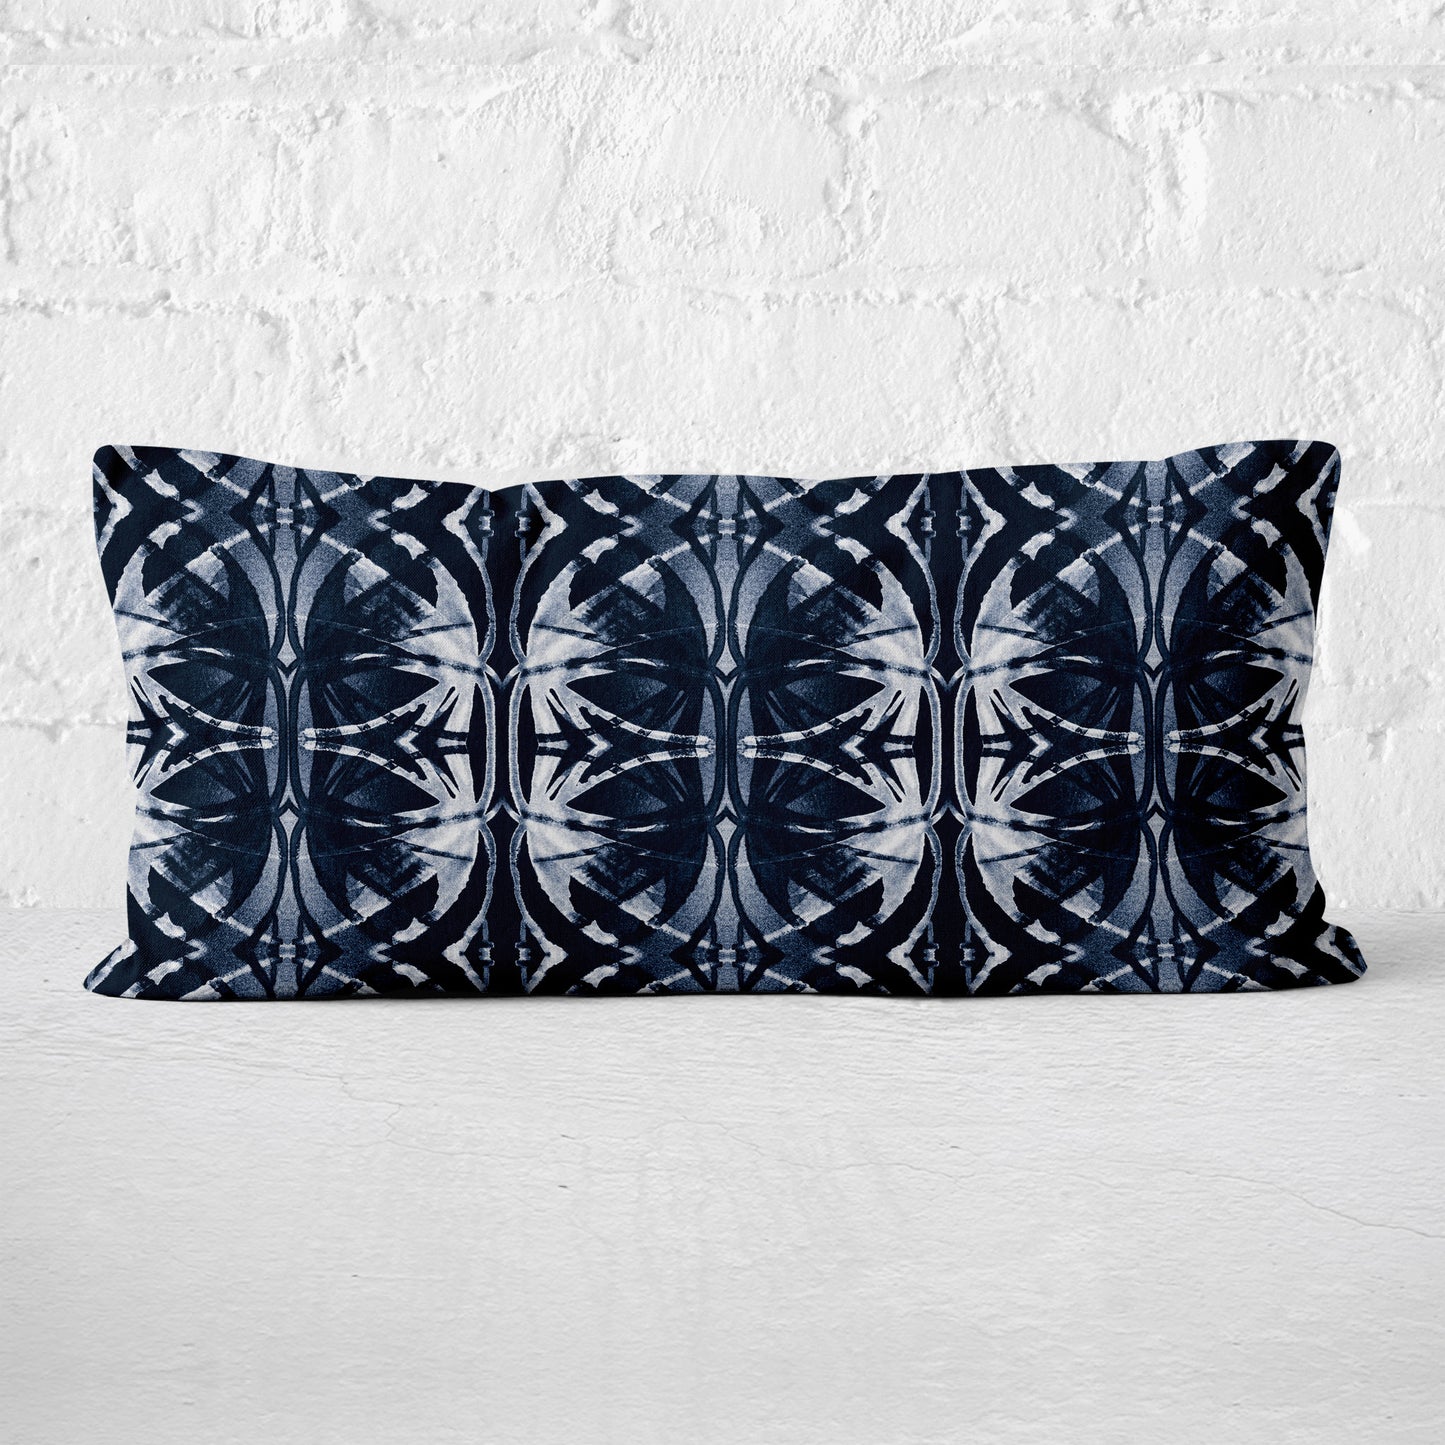 Rectangular pillow featuring abstract pattern in dark blue and white leaning against a white brick wall.